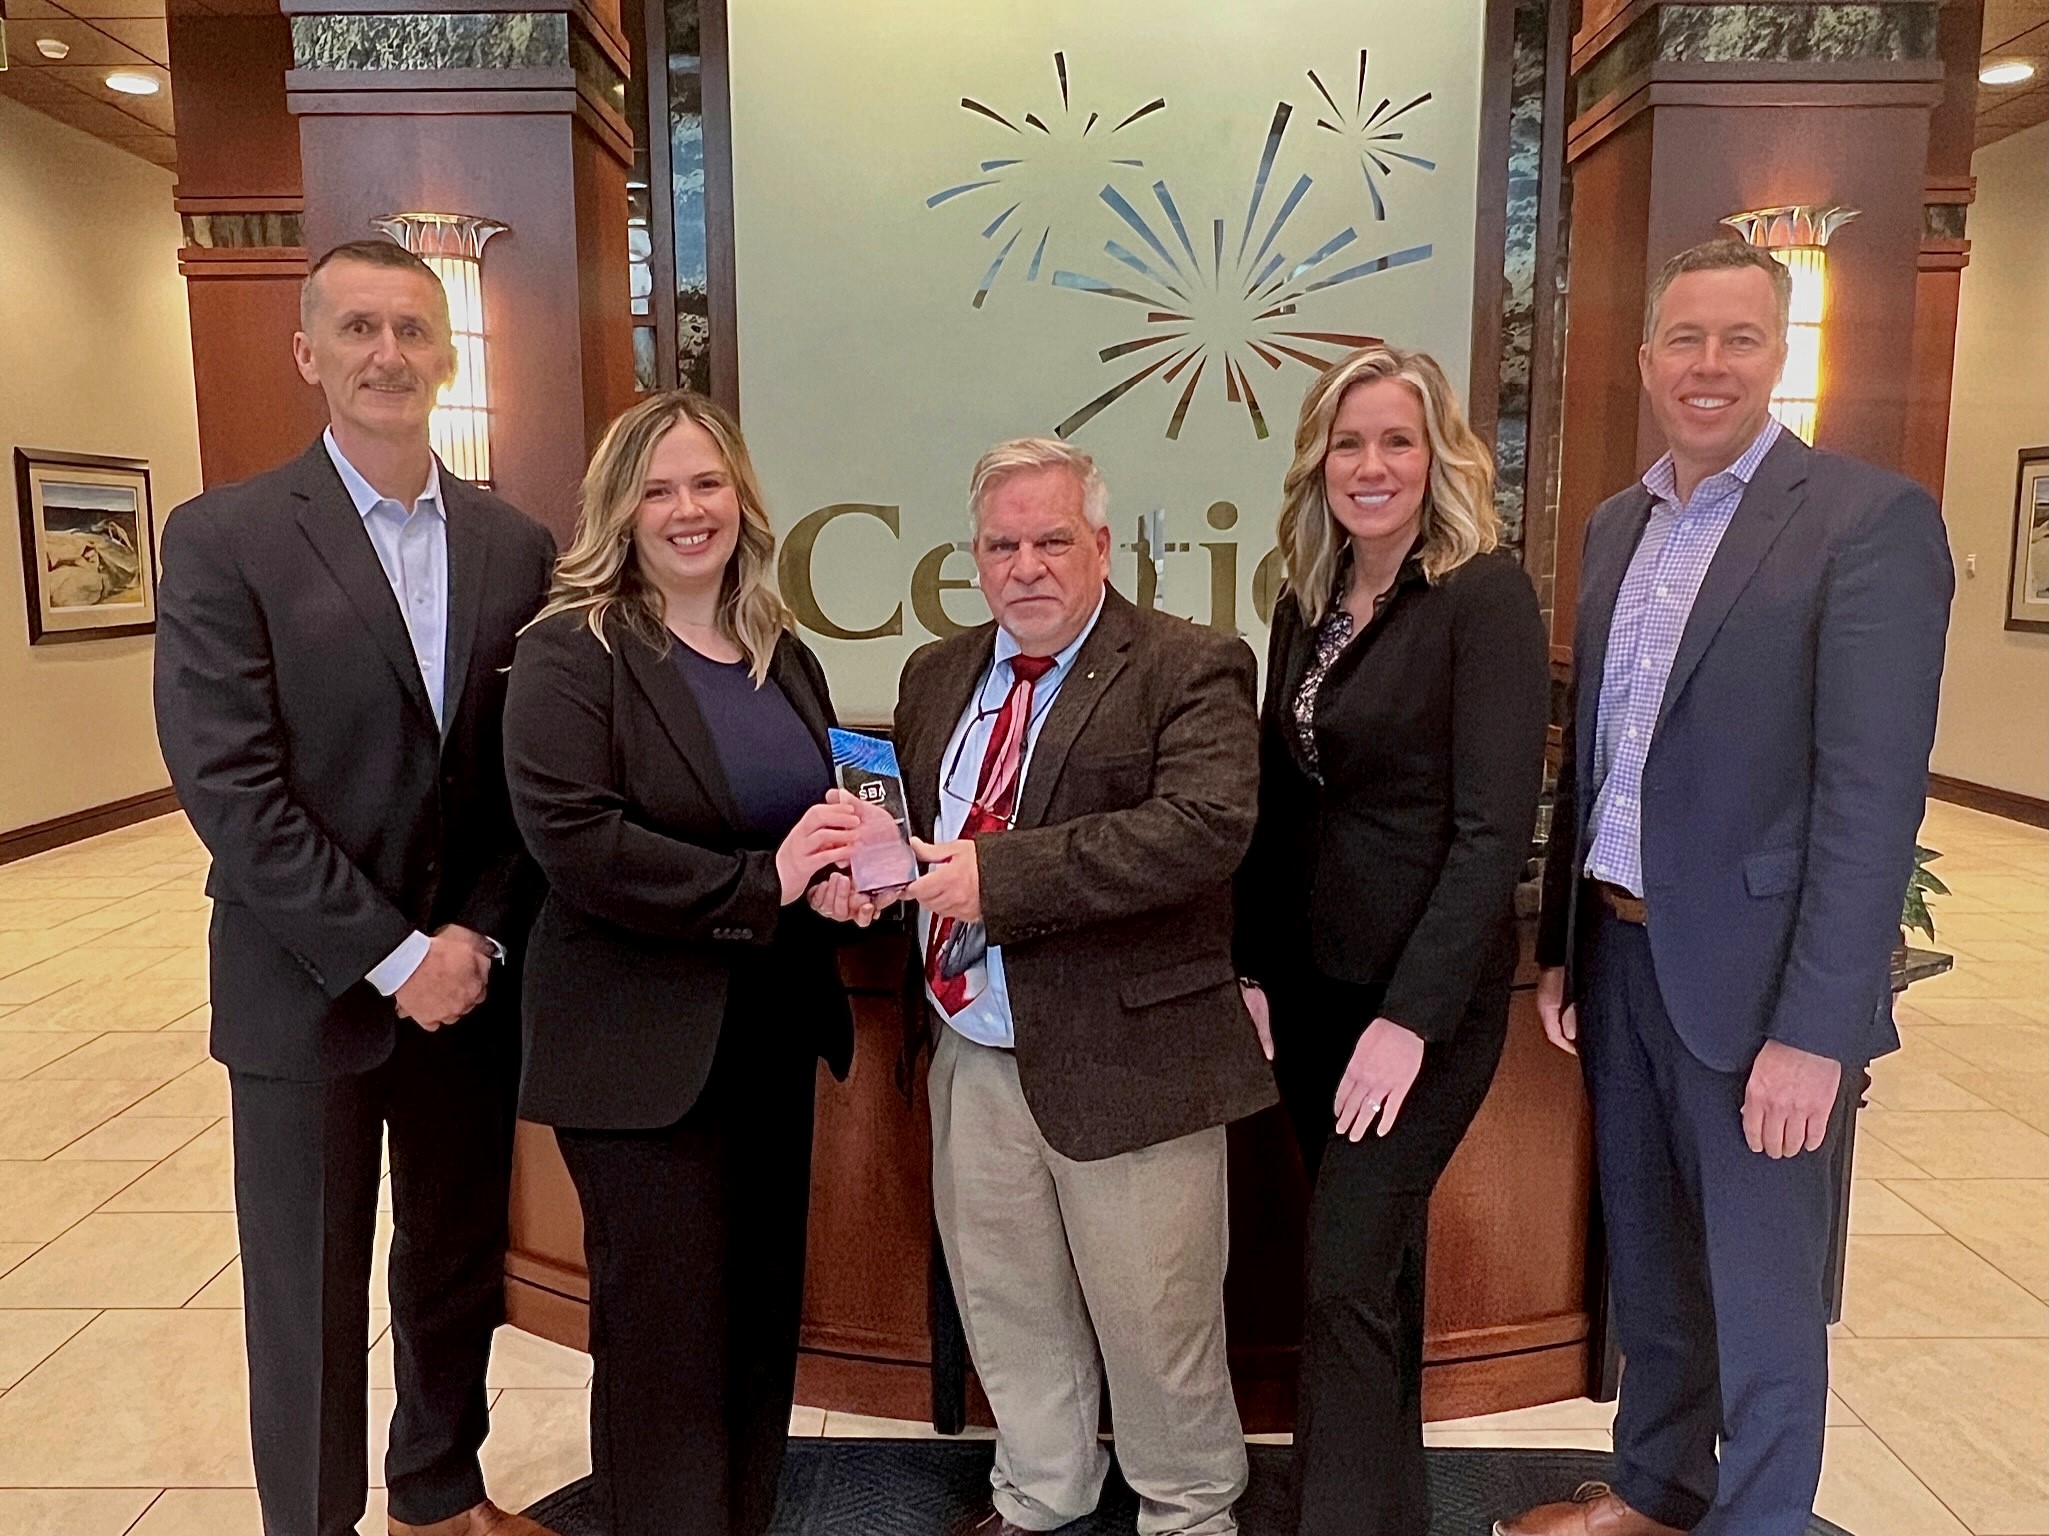 (Left to Right) Centier Bank Small Business Group Manager Jerry Tomasic; Centier Bank Small Business Manager Nicole Batista; SBA Indiana District Office Lender Relations Specialist Peter Smith; Centier Bank Small Business Banker, Lydia Bowen; Centier Bank President Chris Campbell.